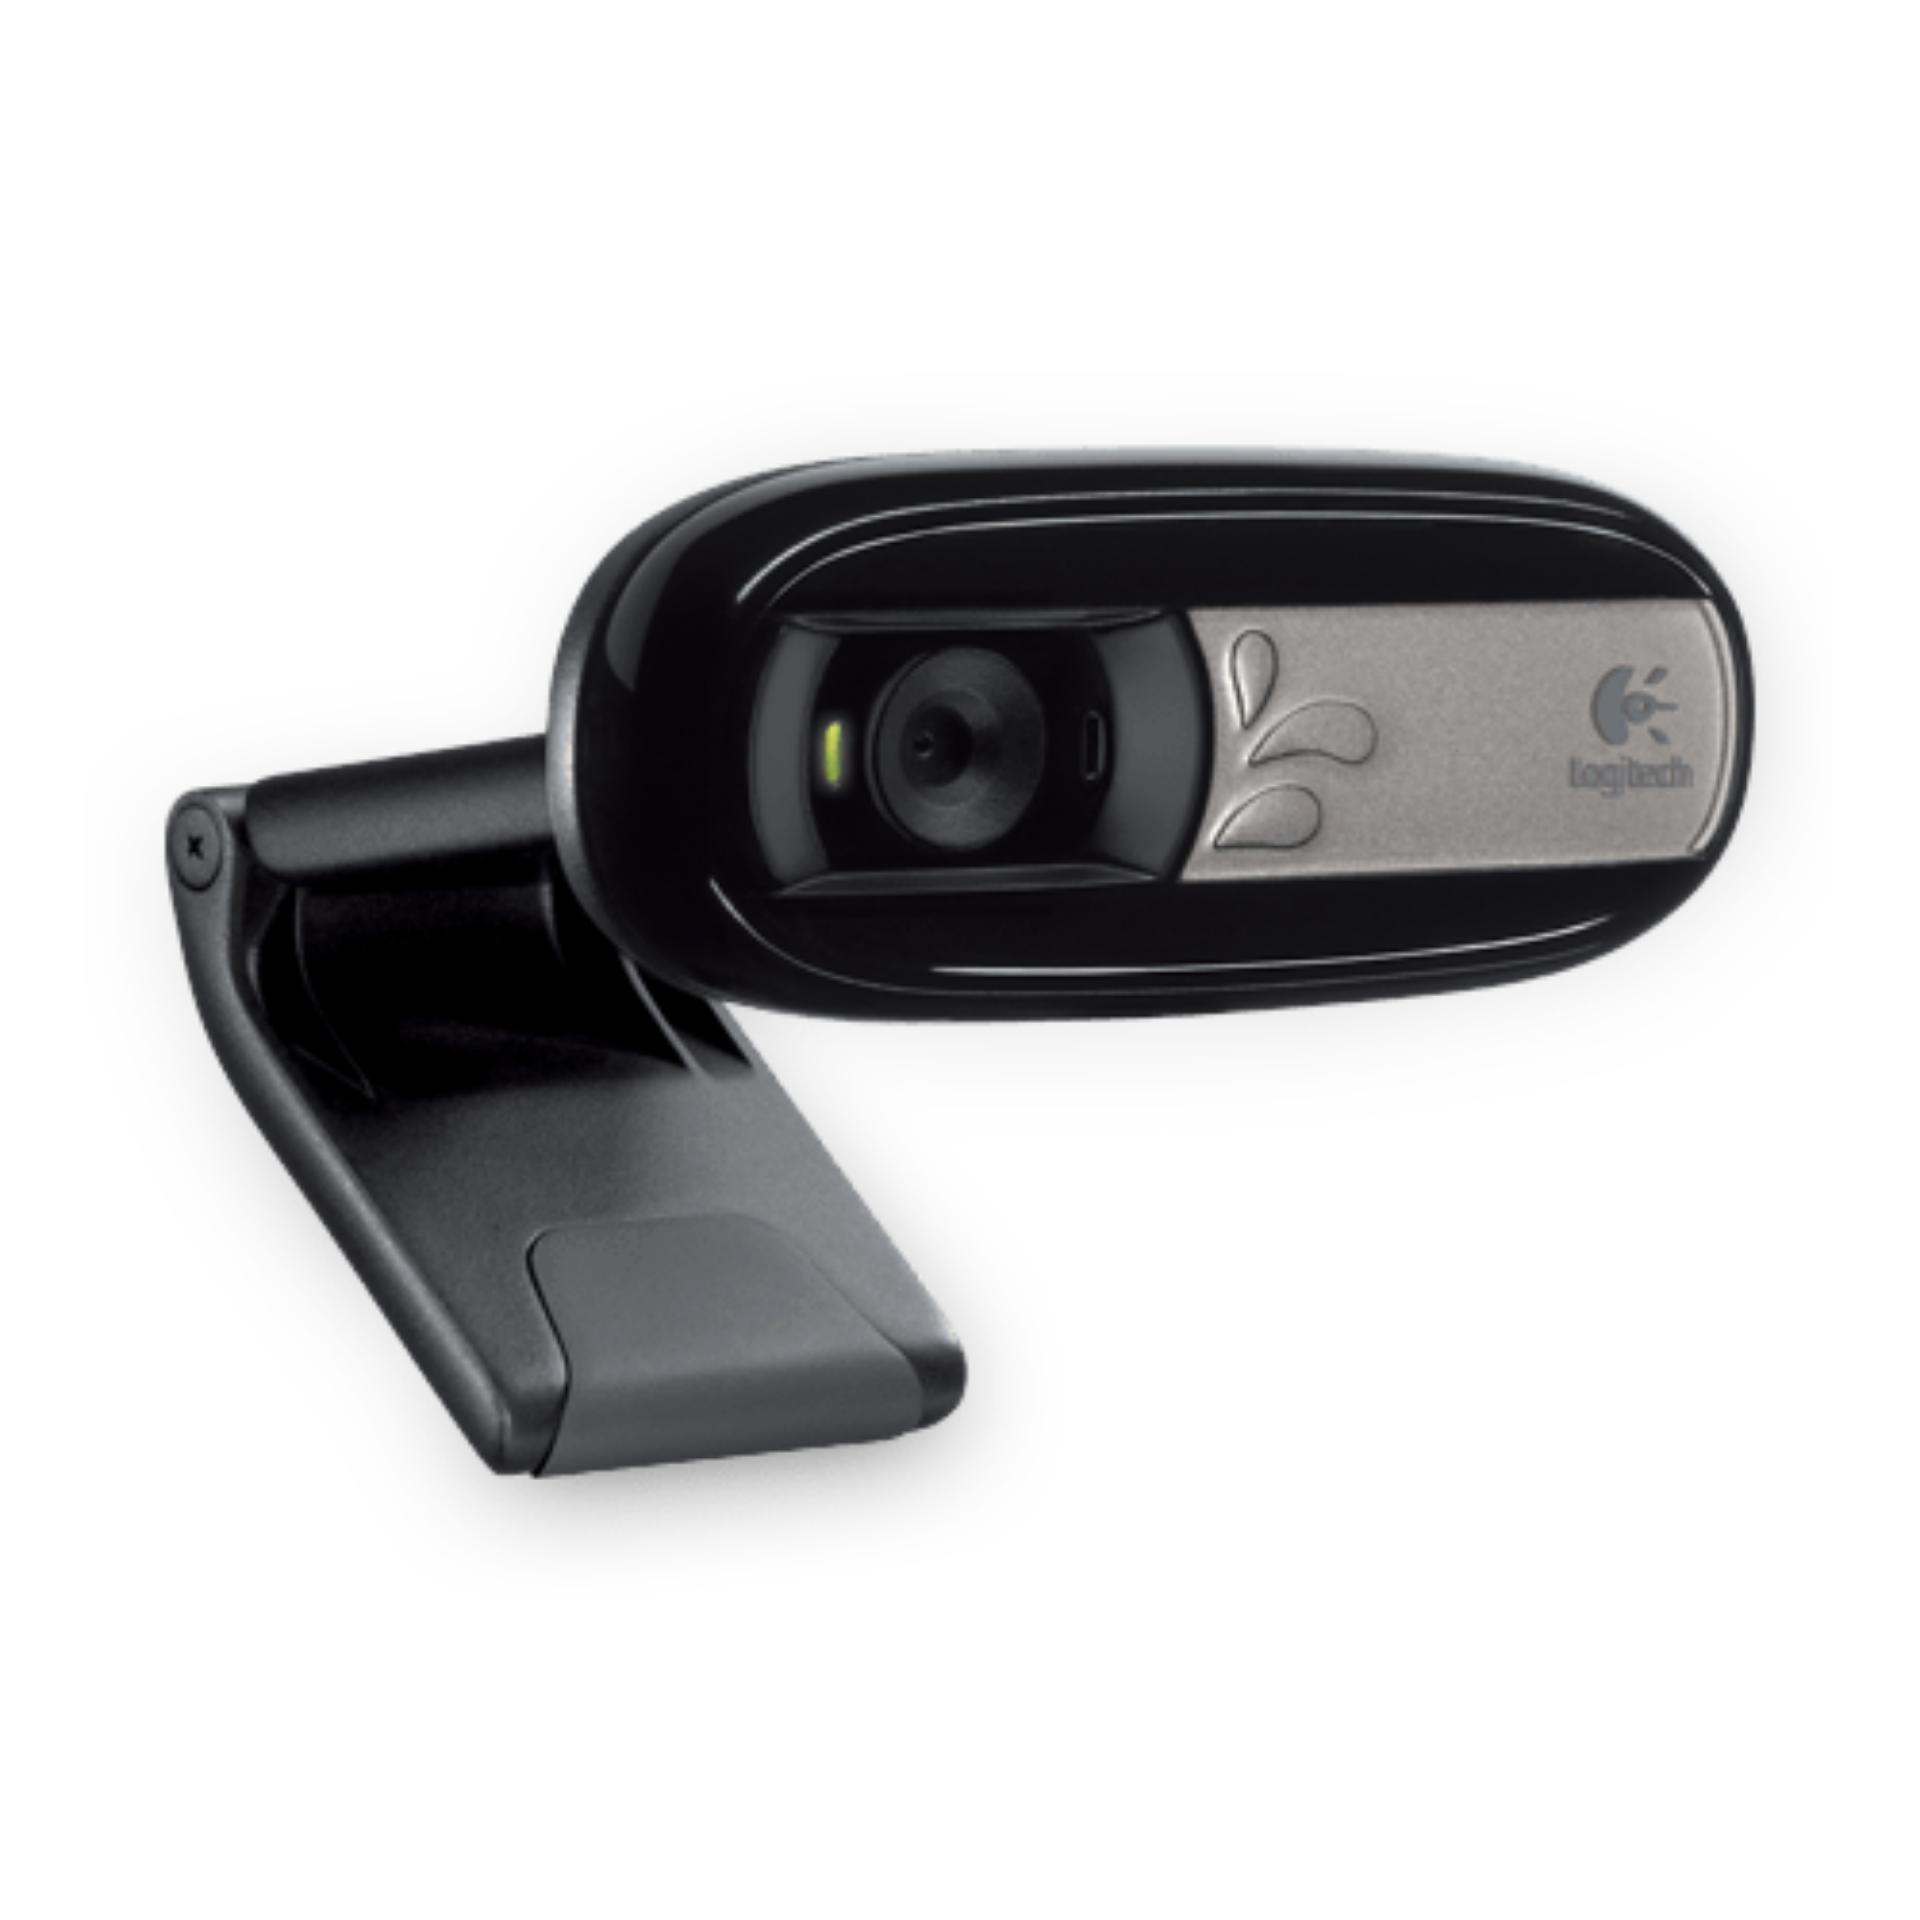 Logitech C170 Webcam with Built-In Microphone